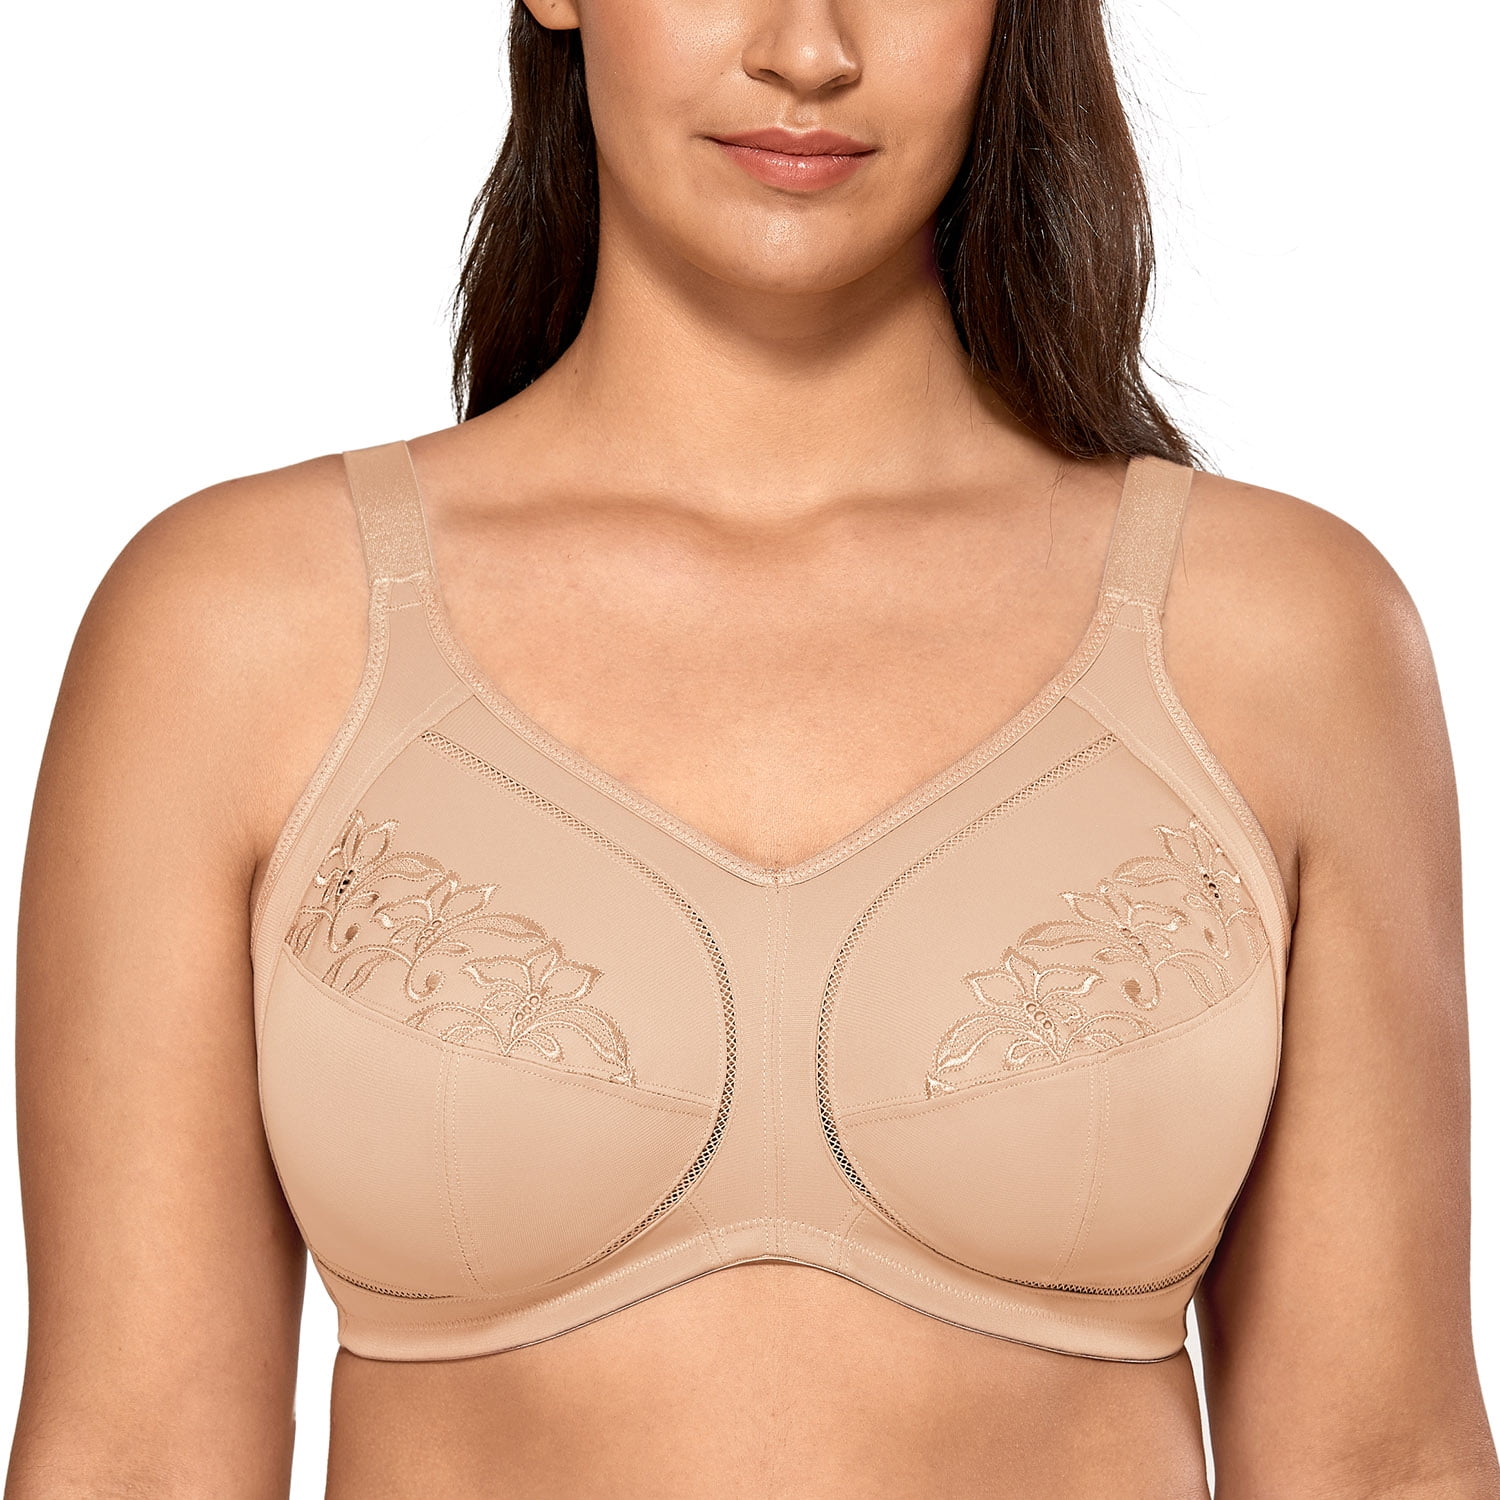 Delimira Womens Plus Size Wirefree Non-Padded Full Coverage Lace Cotton Bra